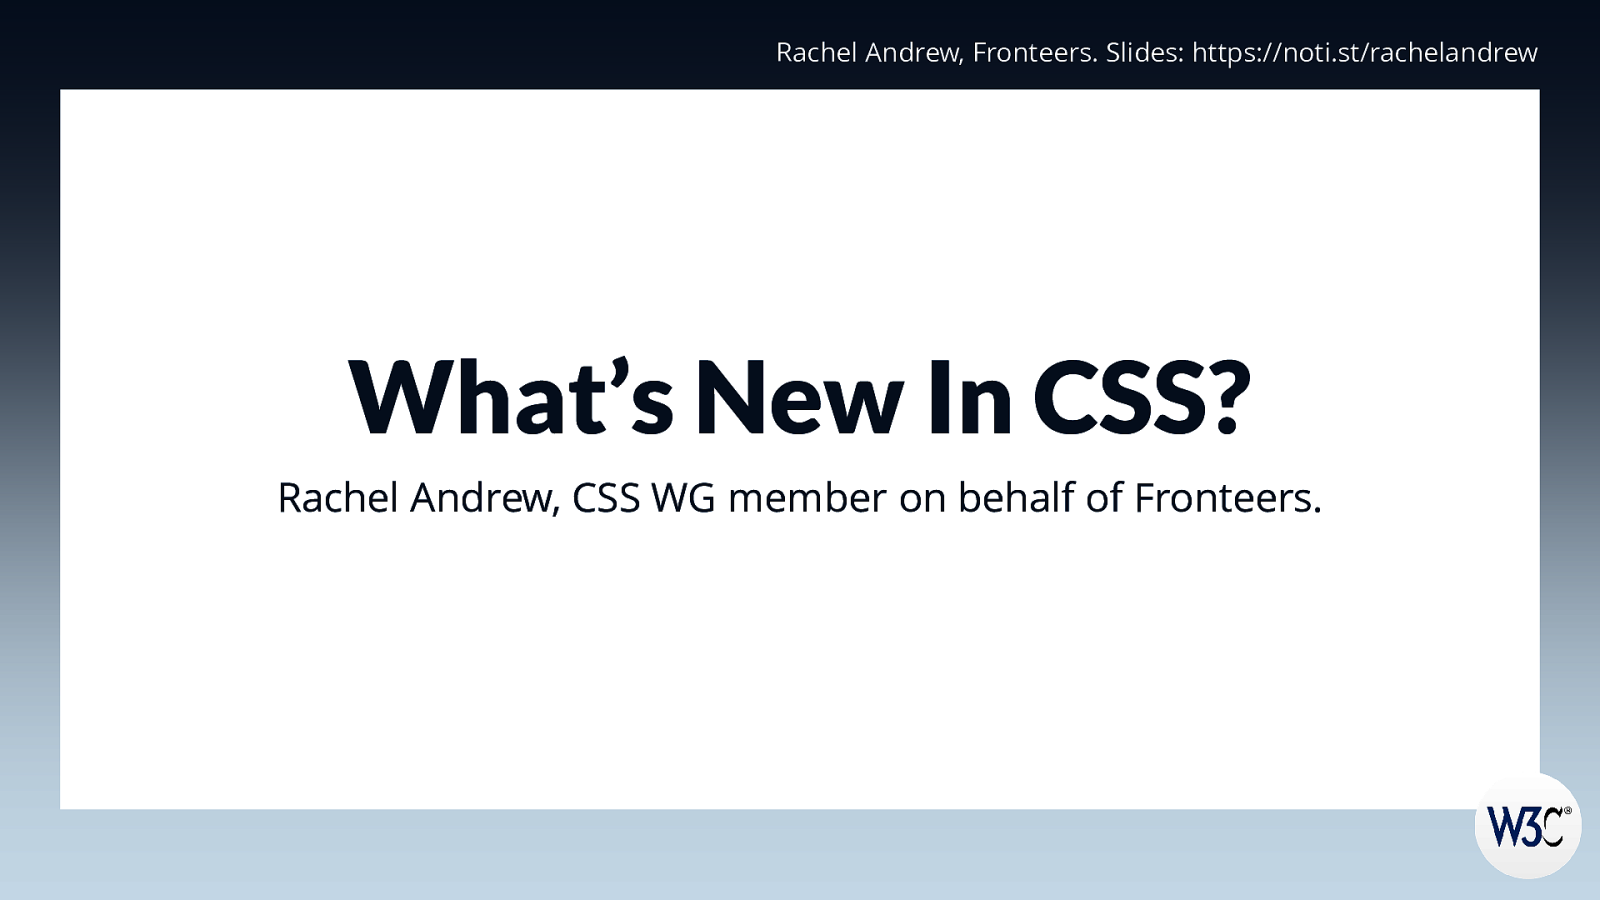 What’s New In CSS?